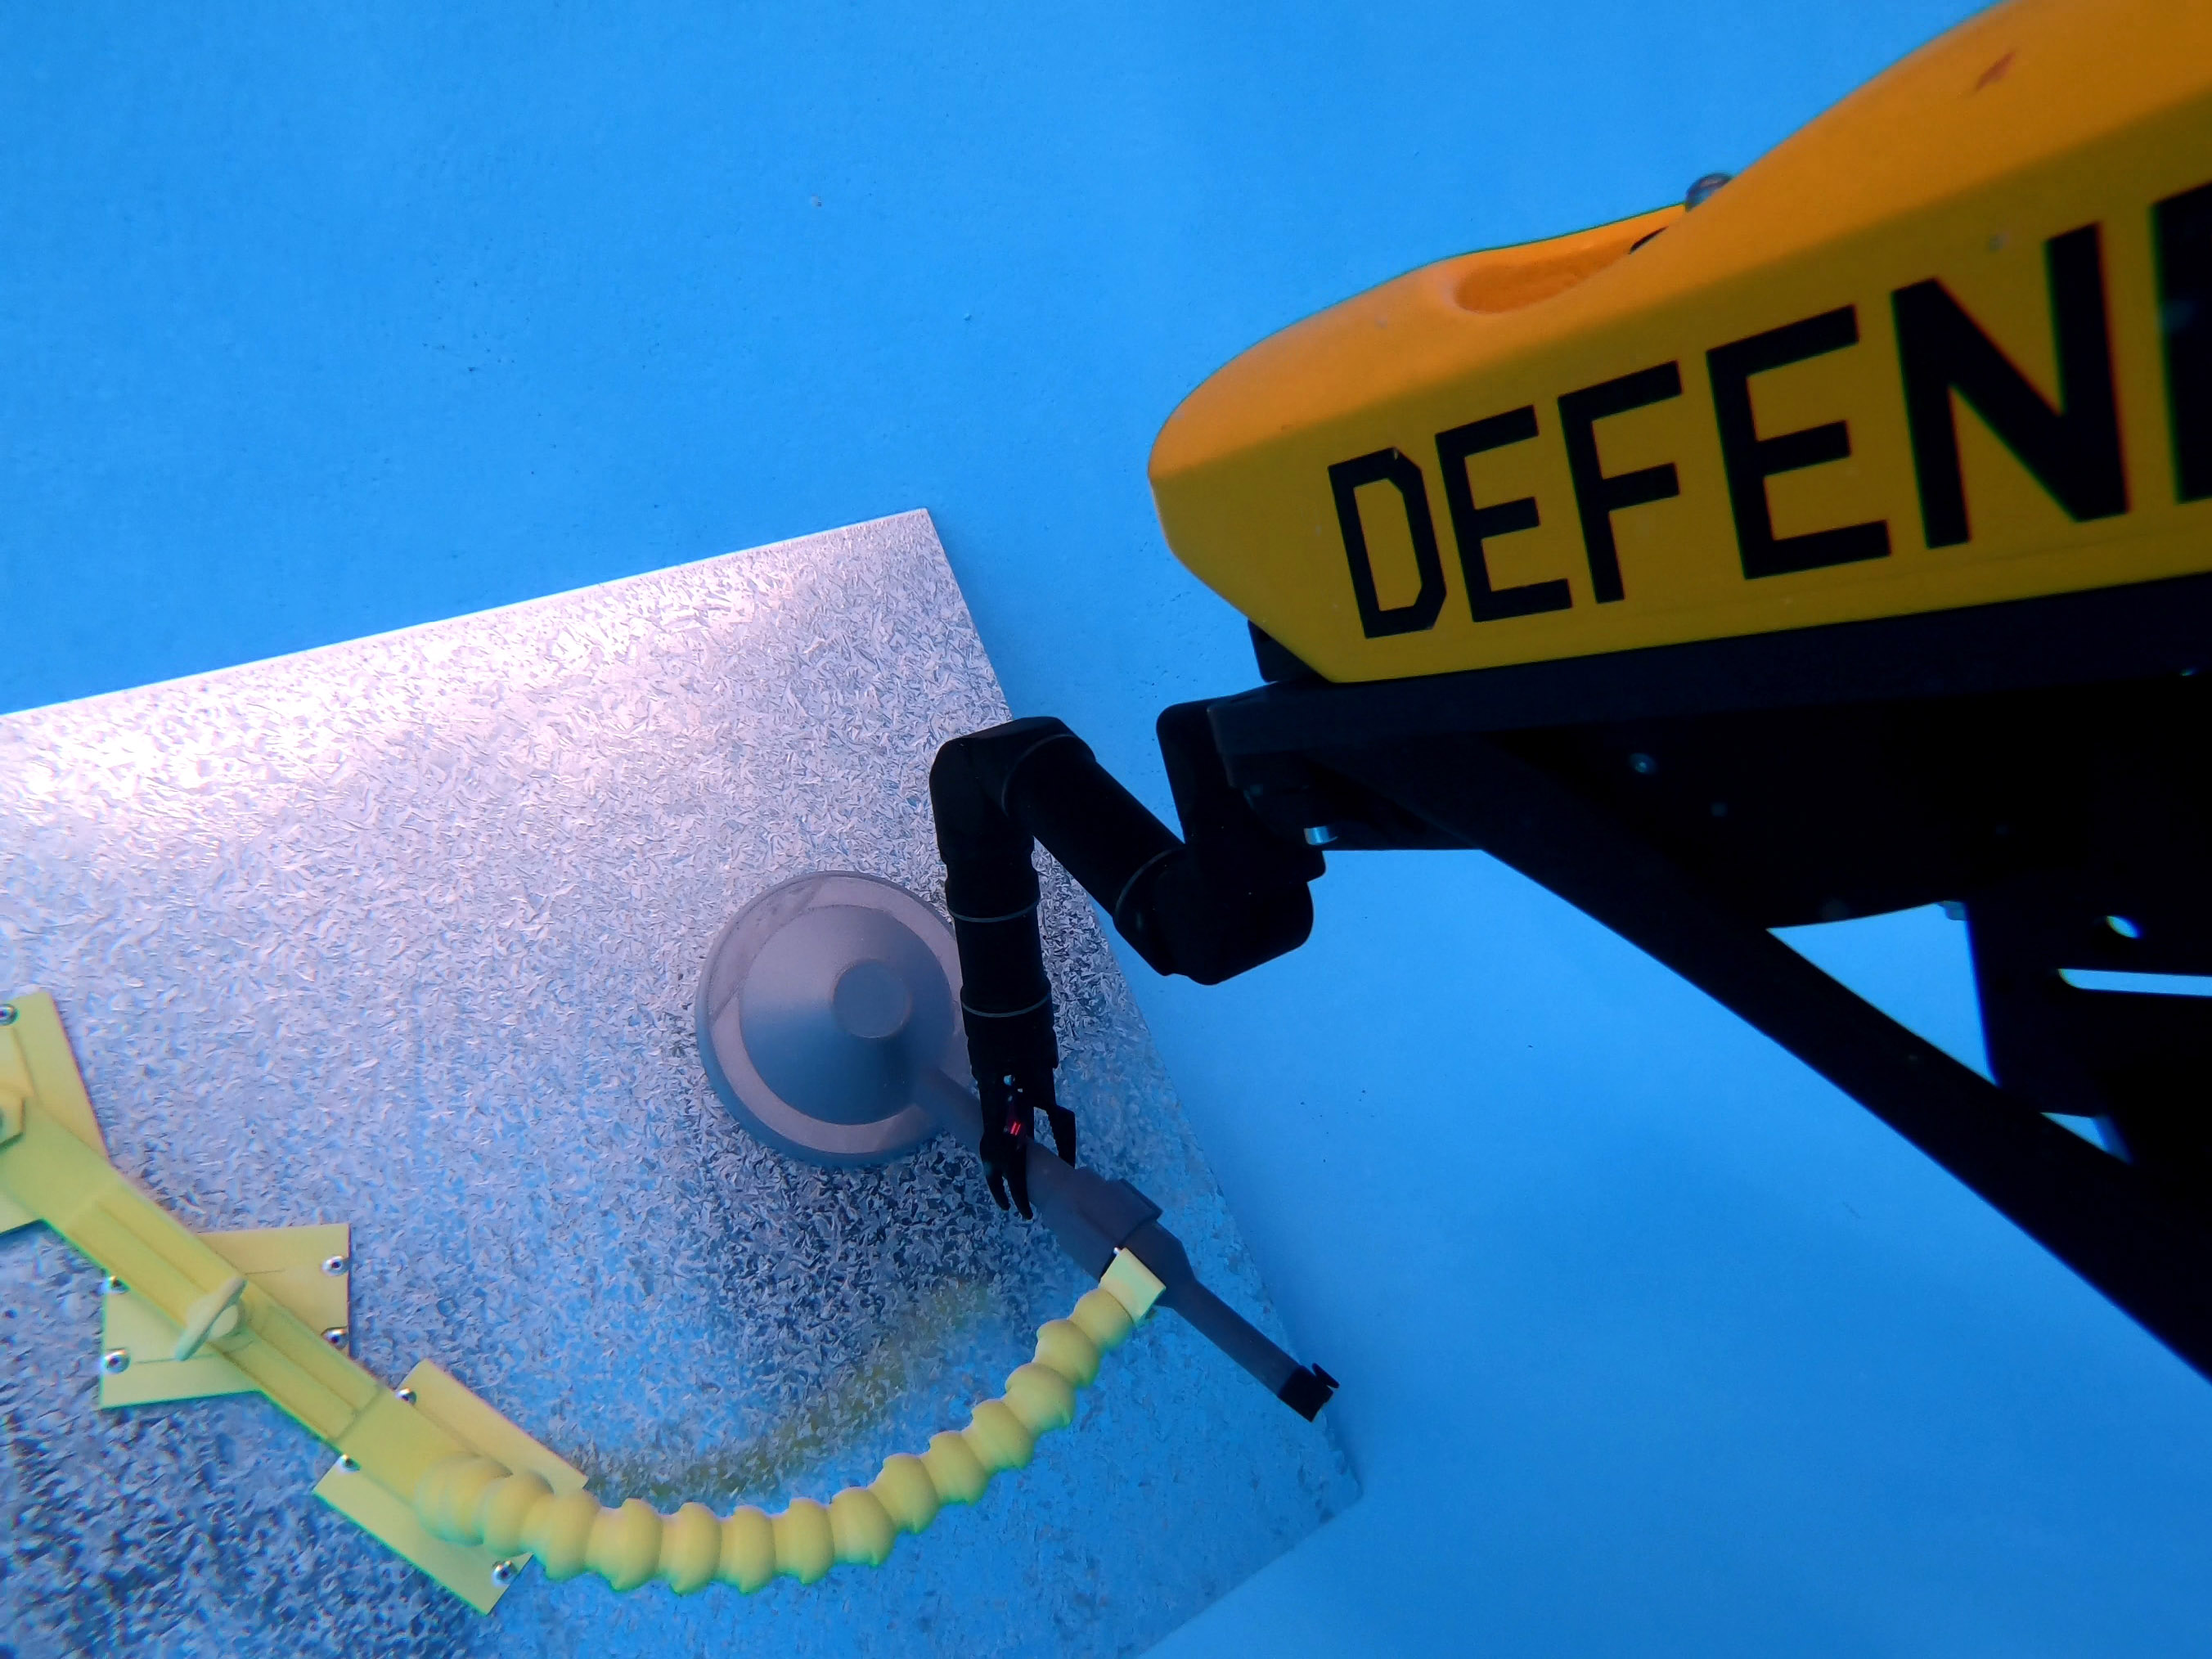 A VideoRay MSS Defender equipped with Blueprint Lab Reach 5 Mini underwater robotic arm carries out intervention trials